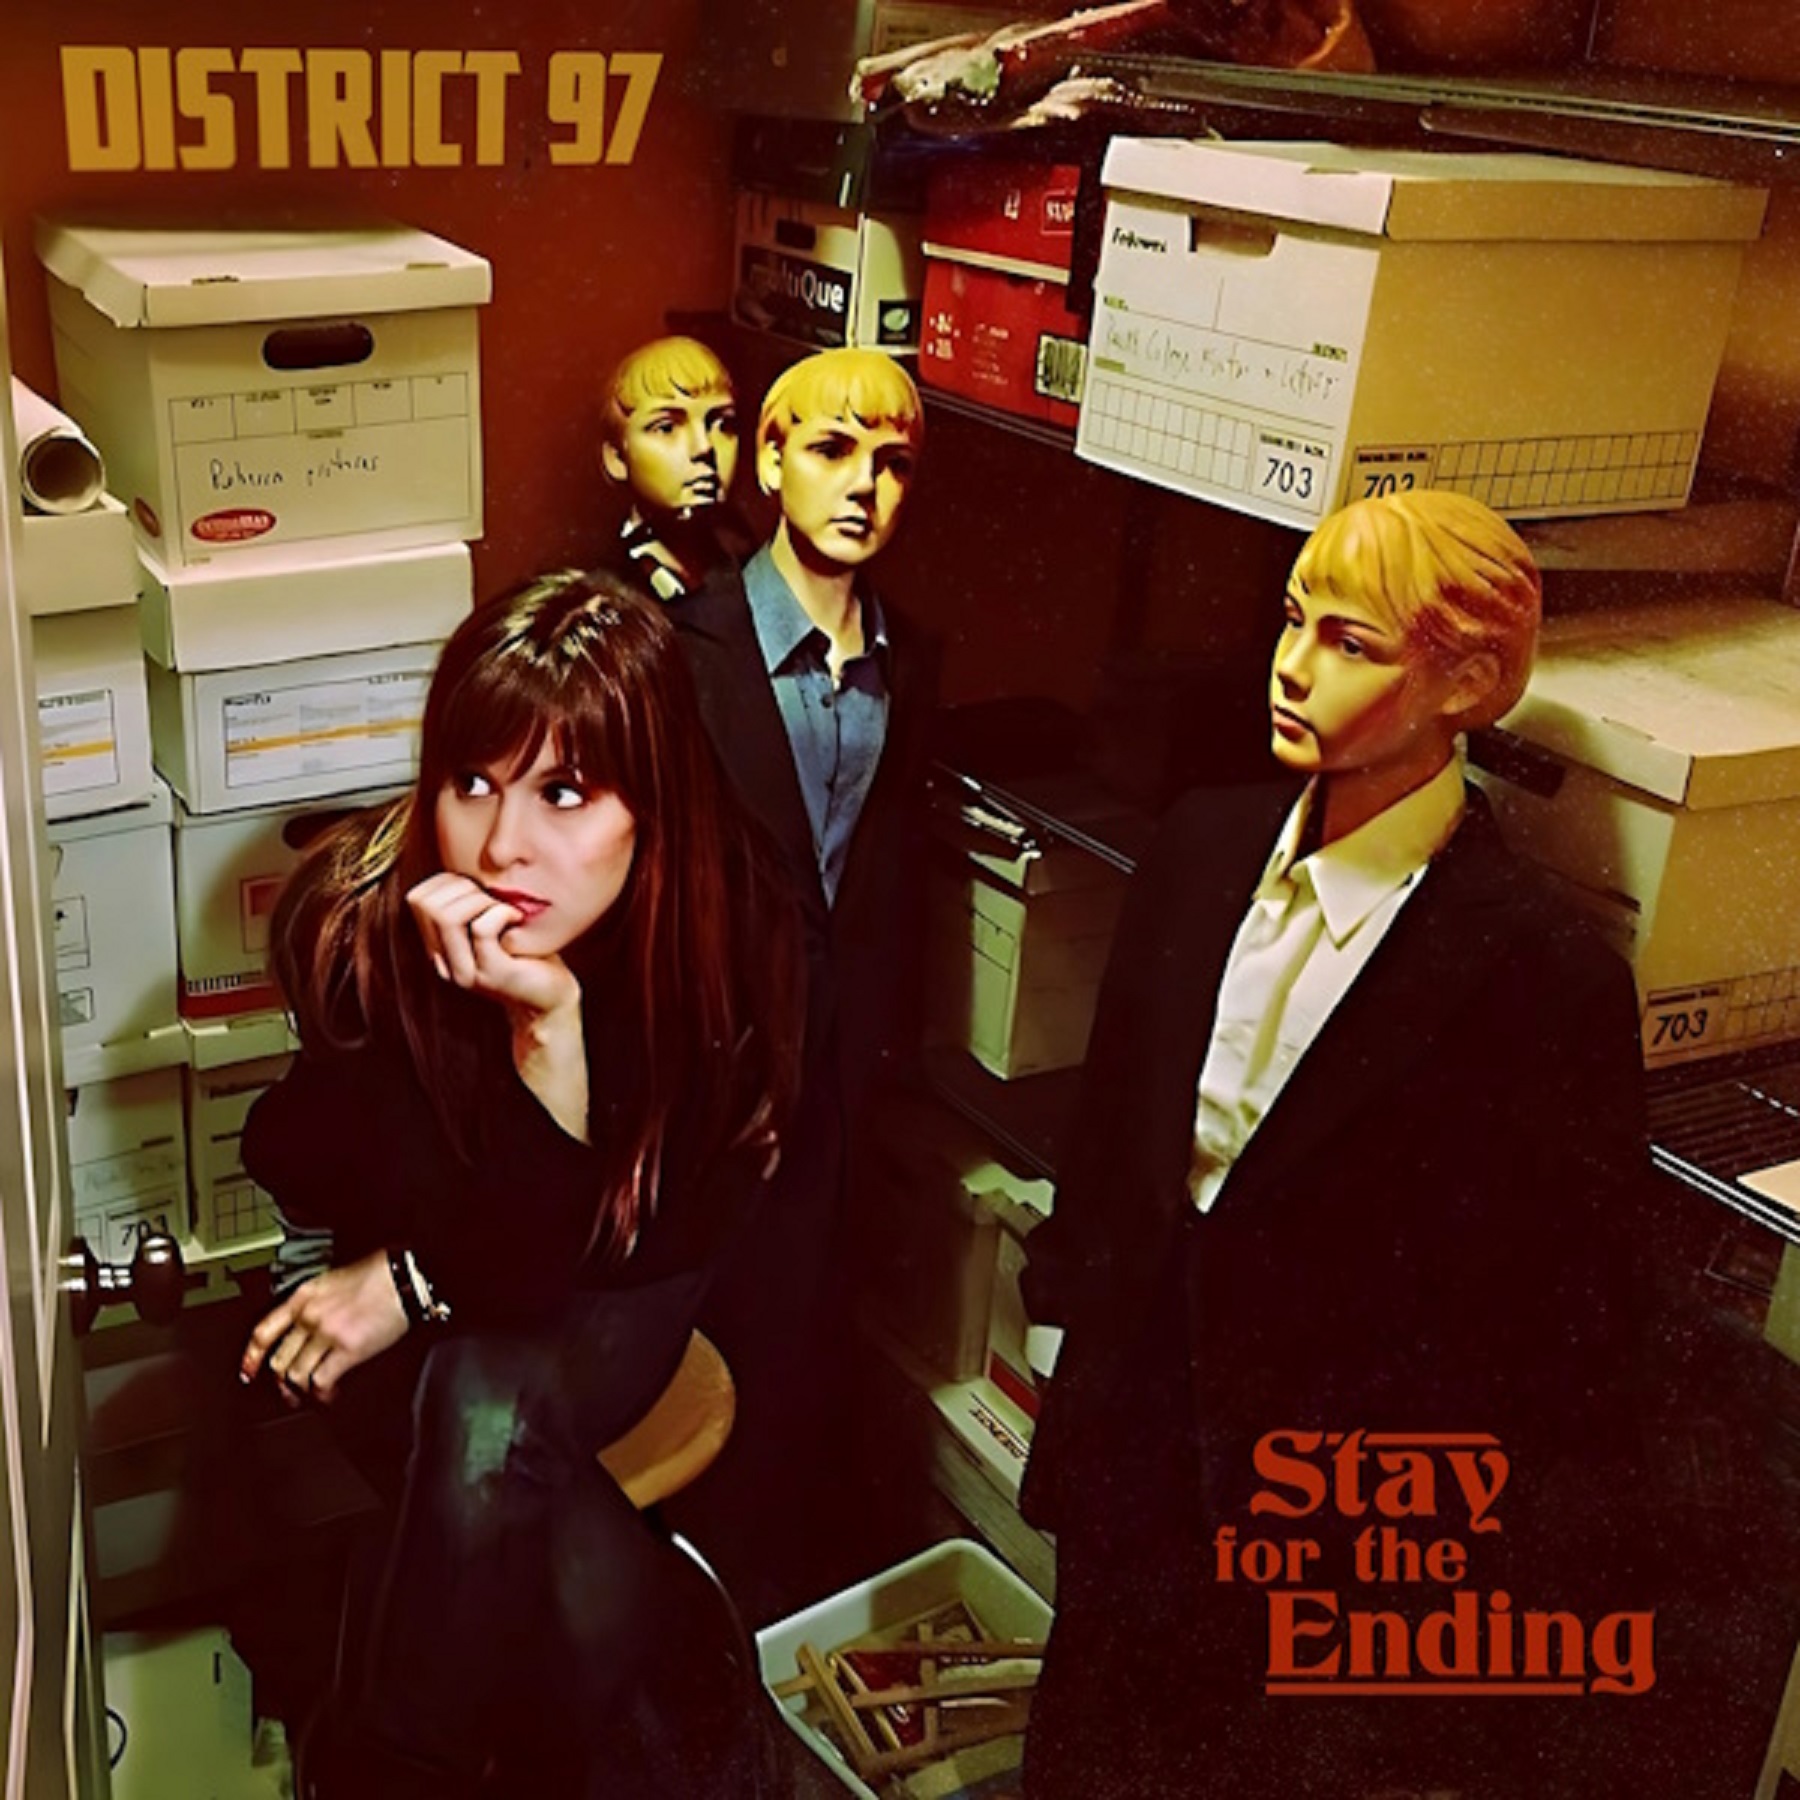 Prog Ensemble District 97 Announce New Album Stay For The Ending